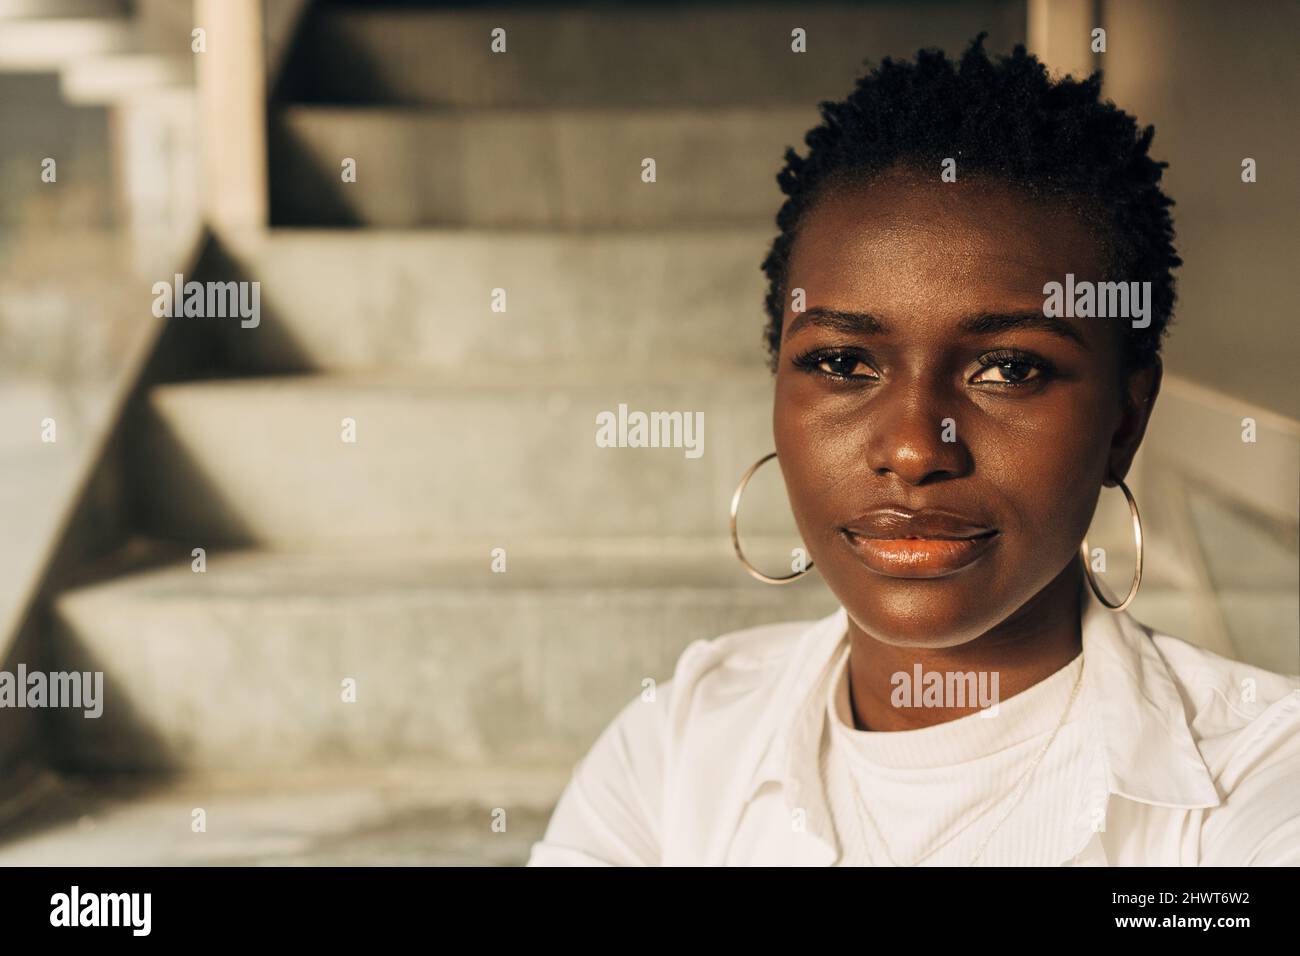 Close-up view of an African American woman looking at the camera with a serious expression on her face. Stock Photo